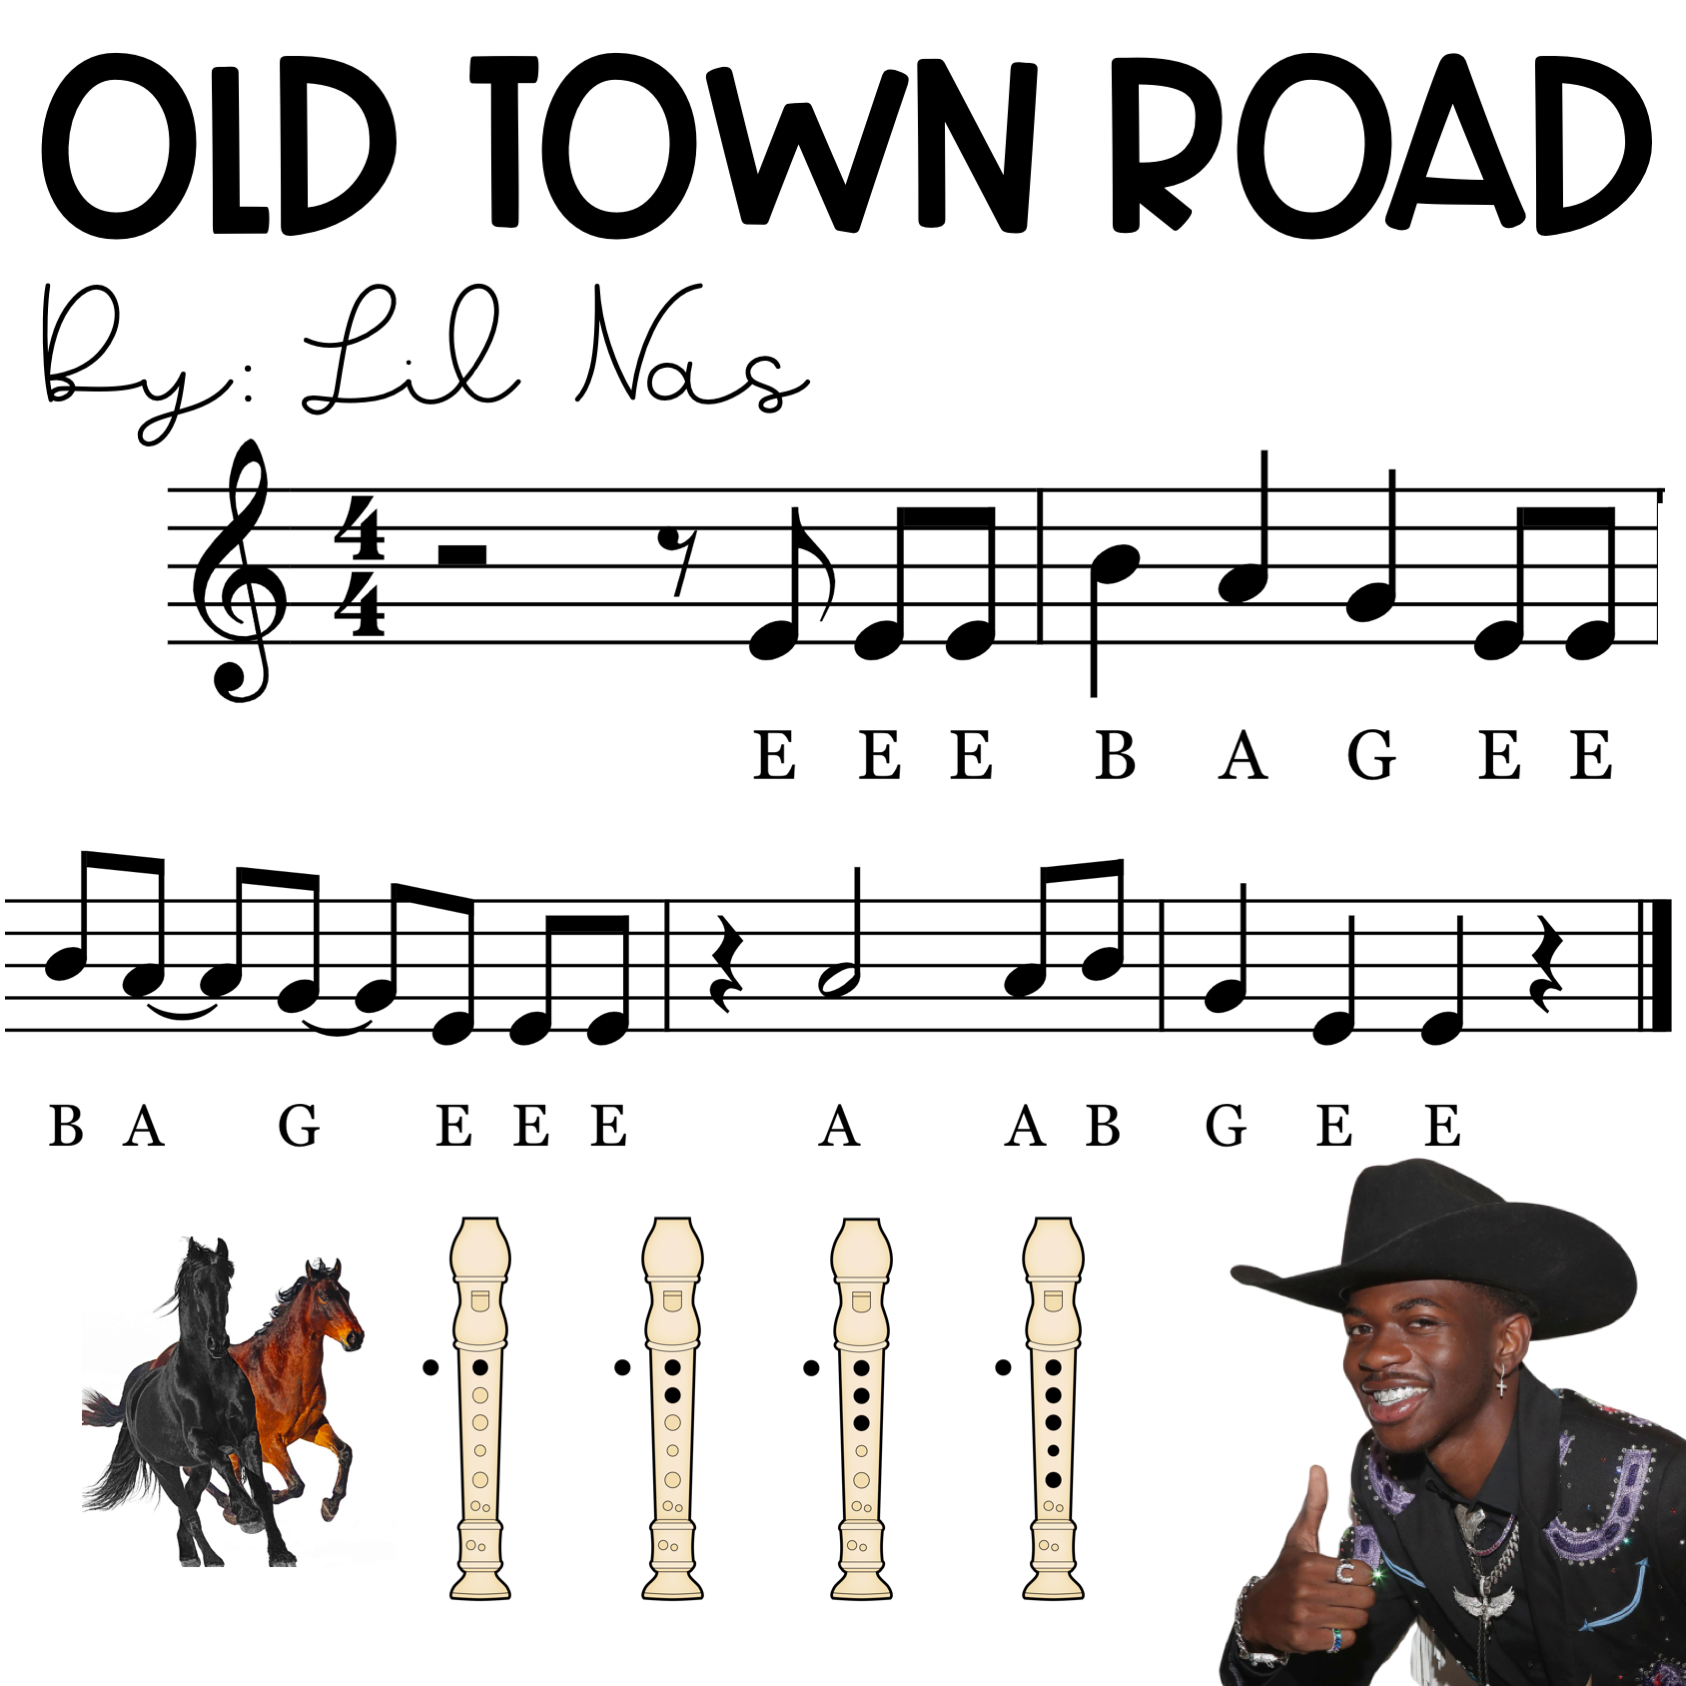 Pop Recorder Songs - Old Town Road.